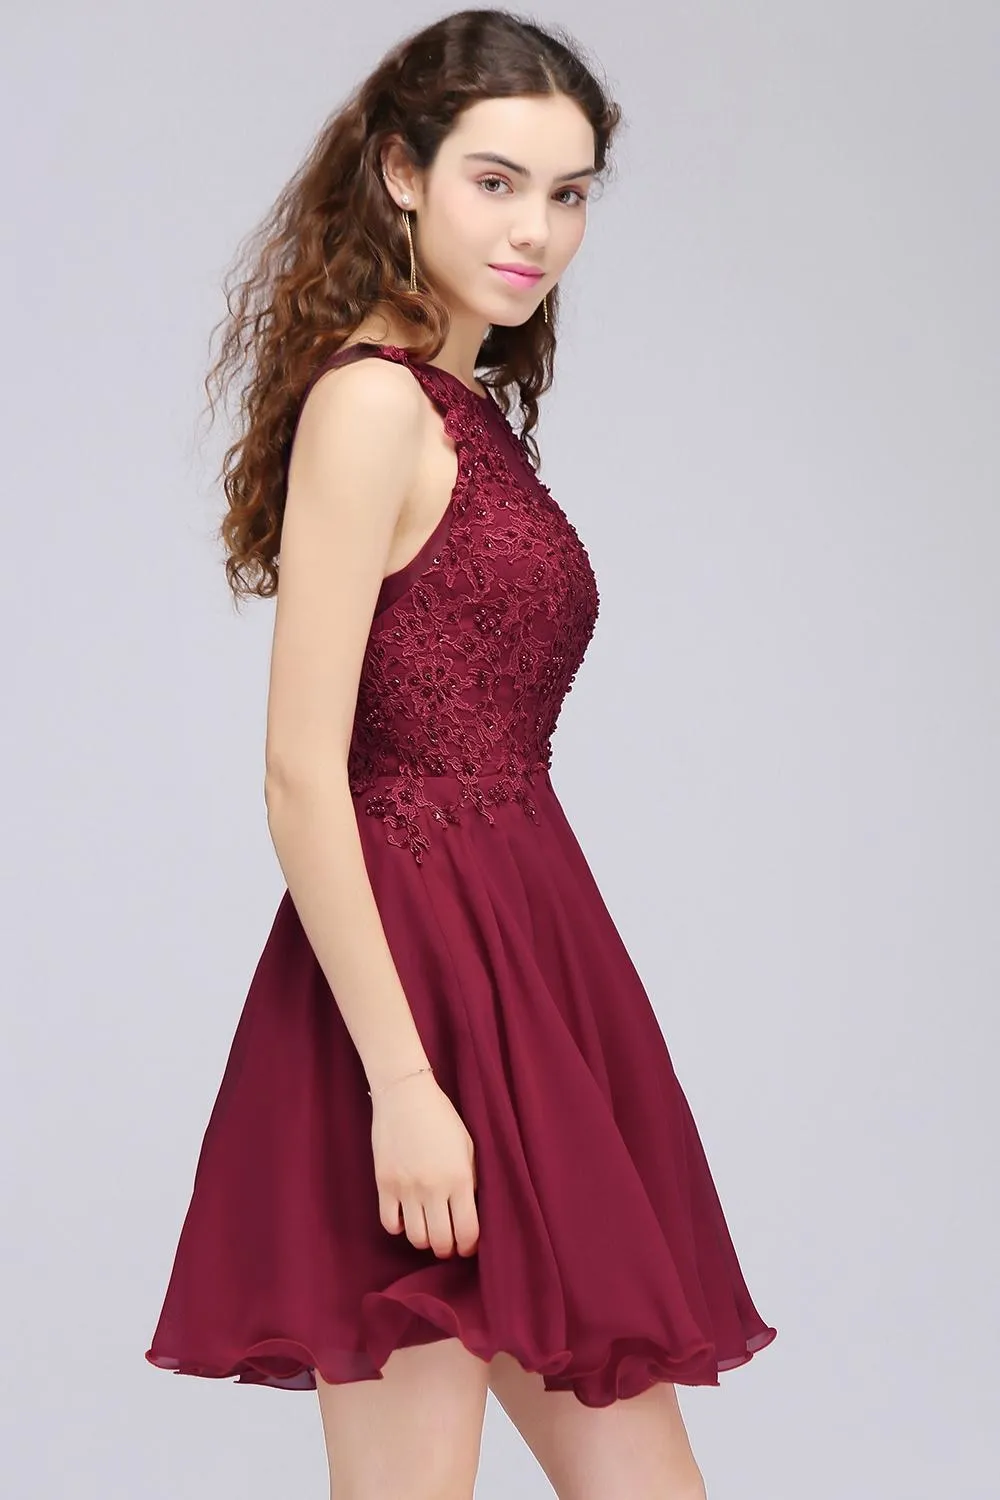 Burgundy Lace Beaded A Line Chiffon Short Homecoming Dresses Cocktail Party Dresses For Young Girls Jewel Neck Graduation Gowns HY208